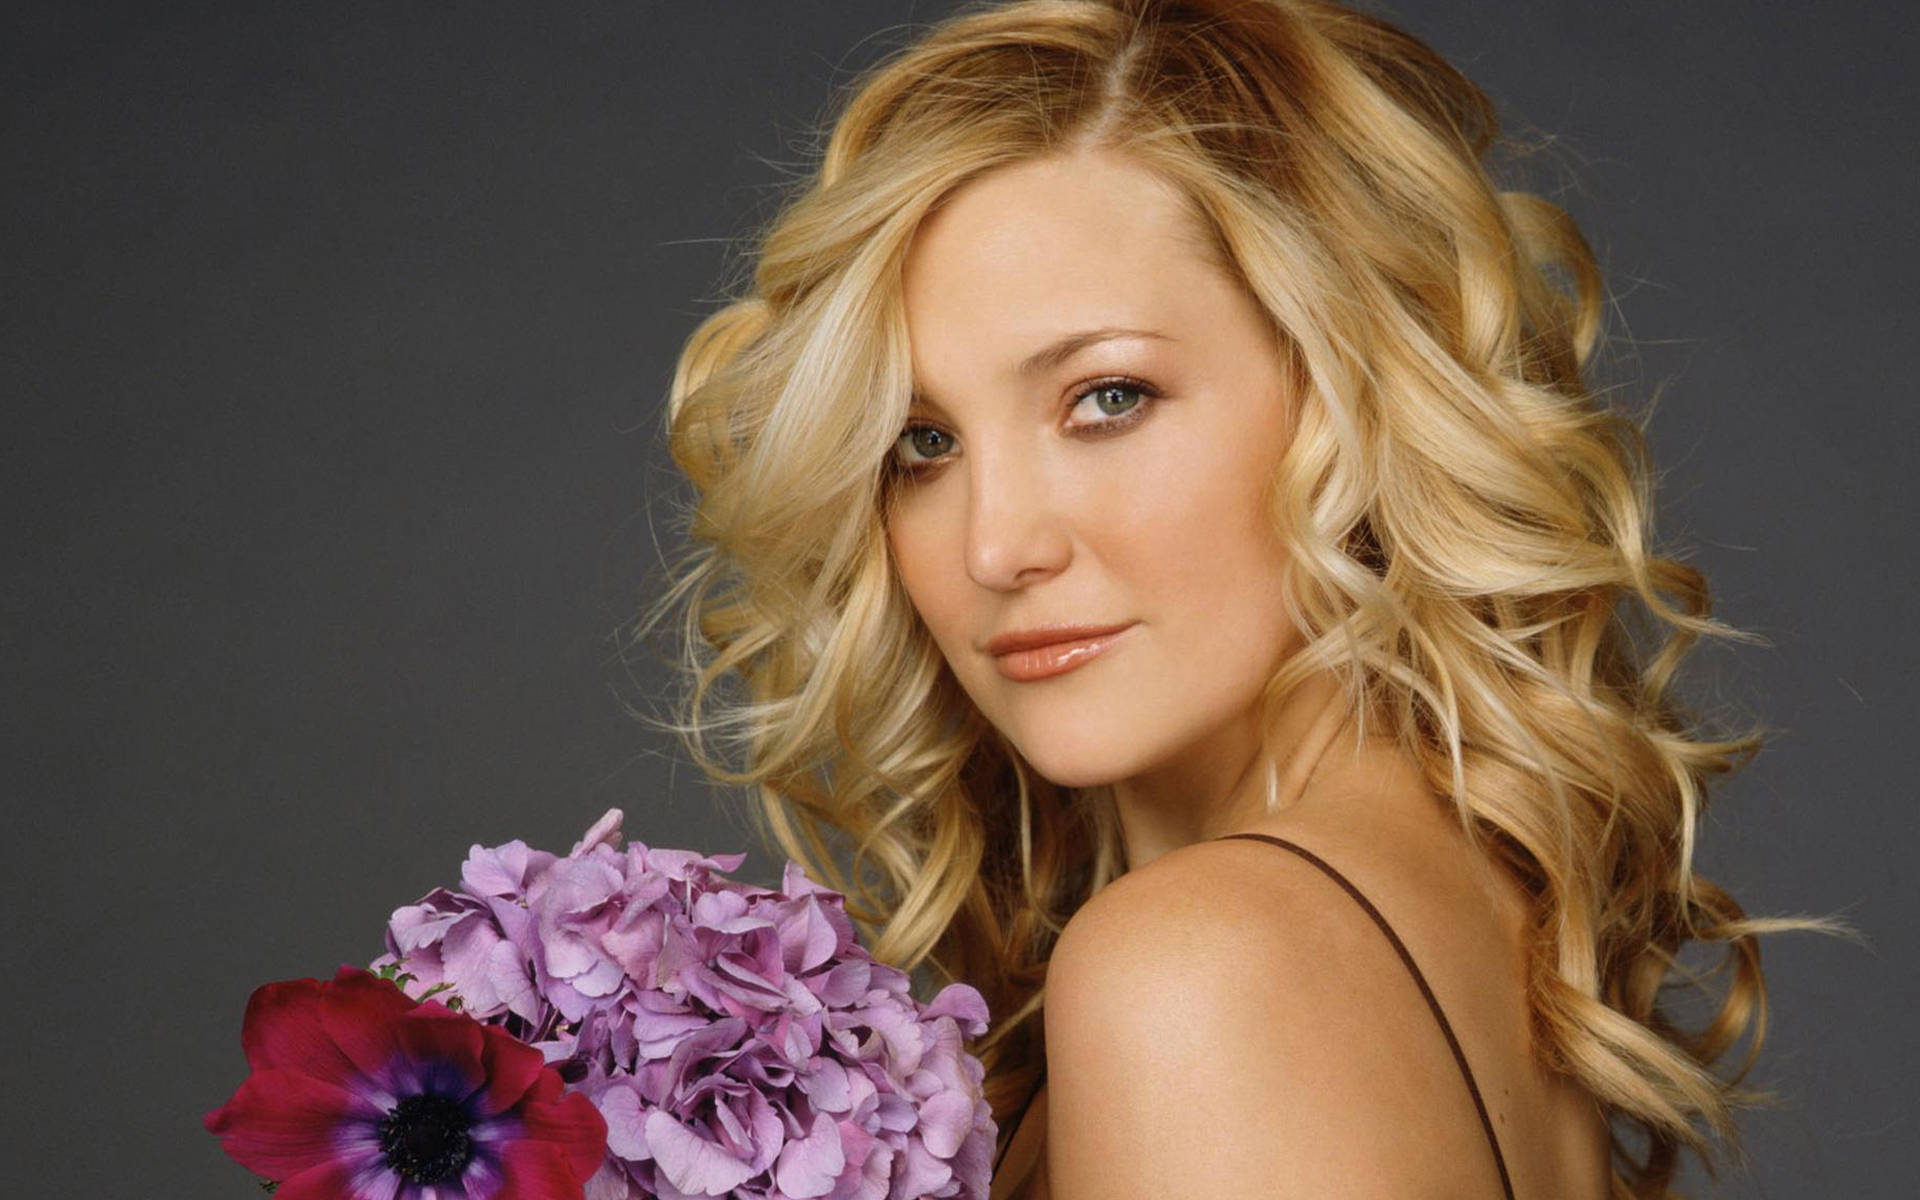 A Captivating Image Of Kate Hudson Holding Beautiful Pansy Flowers